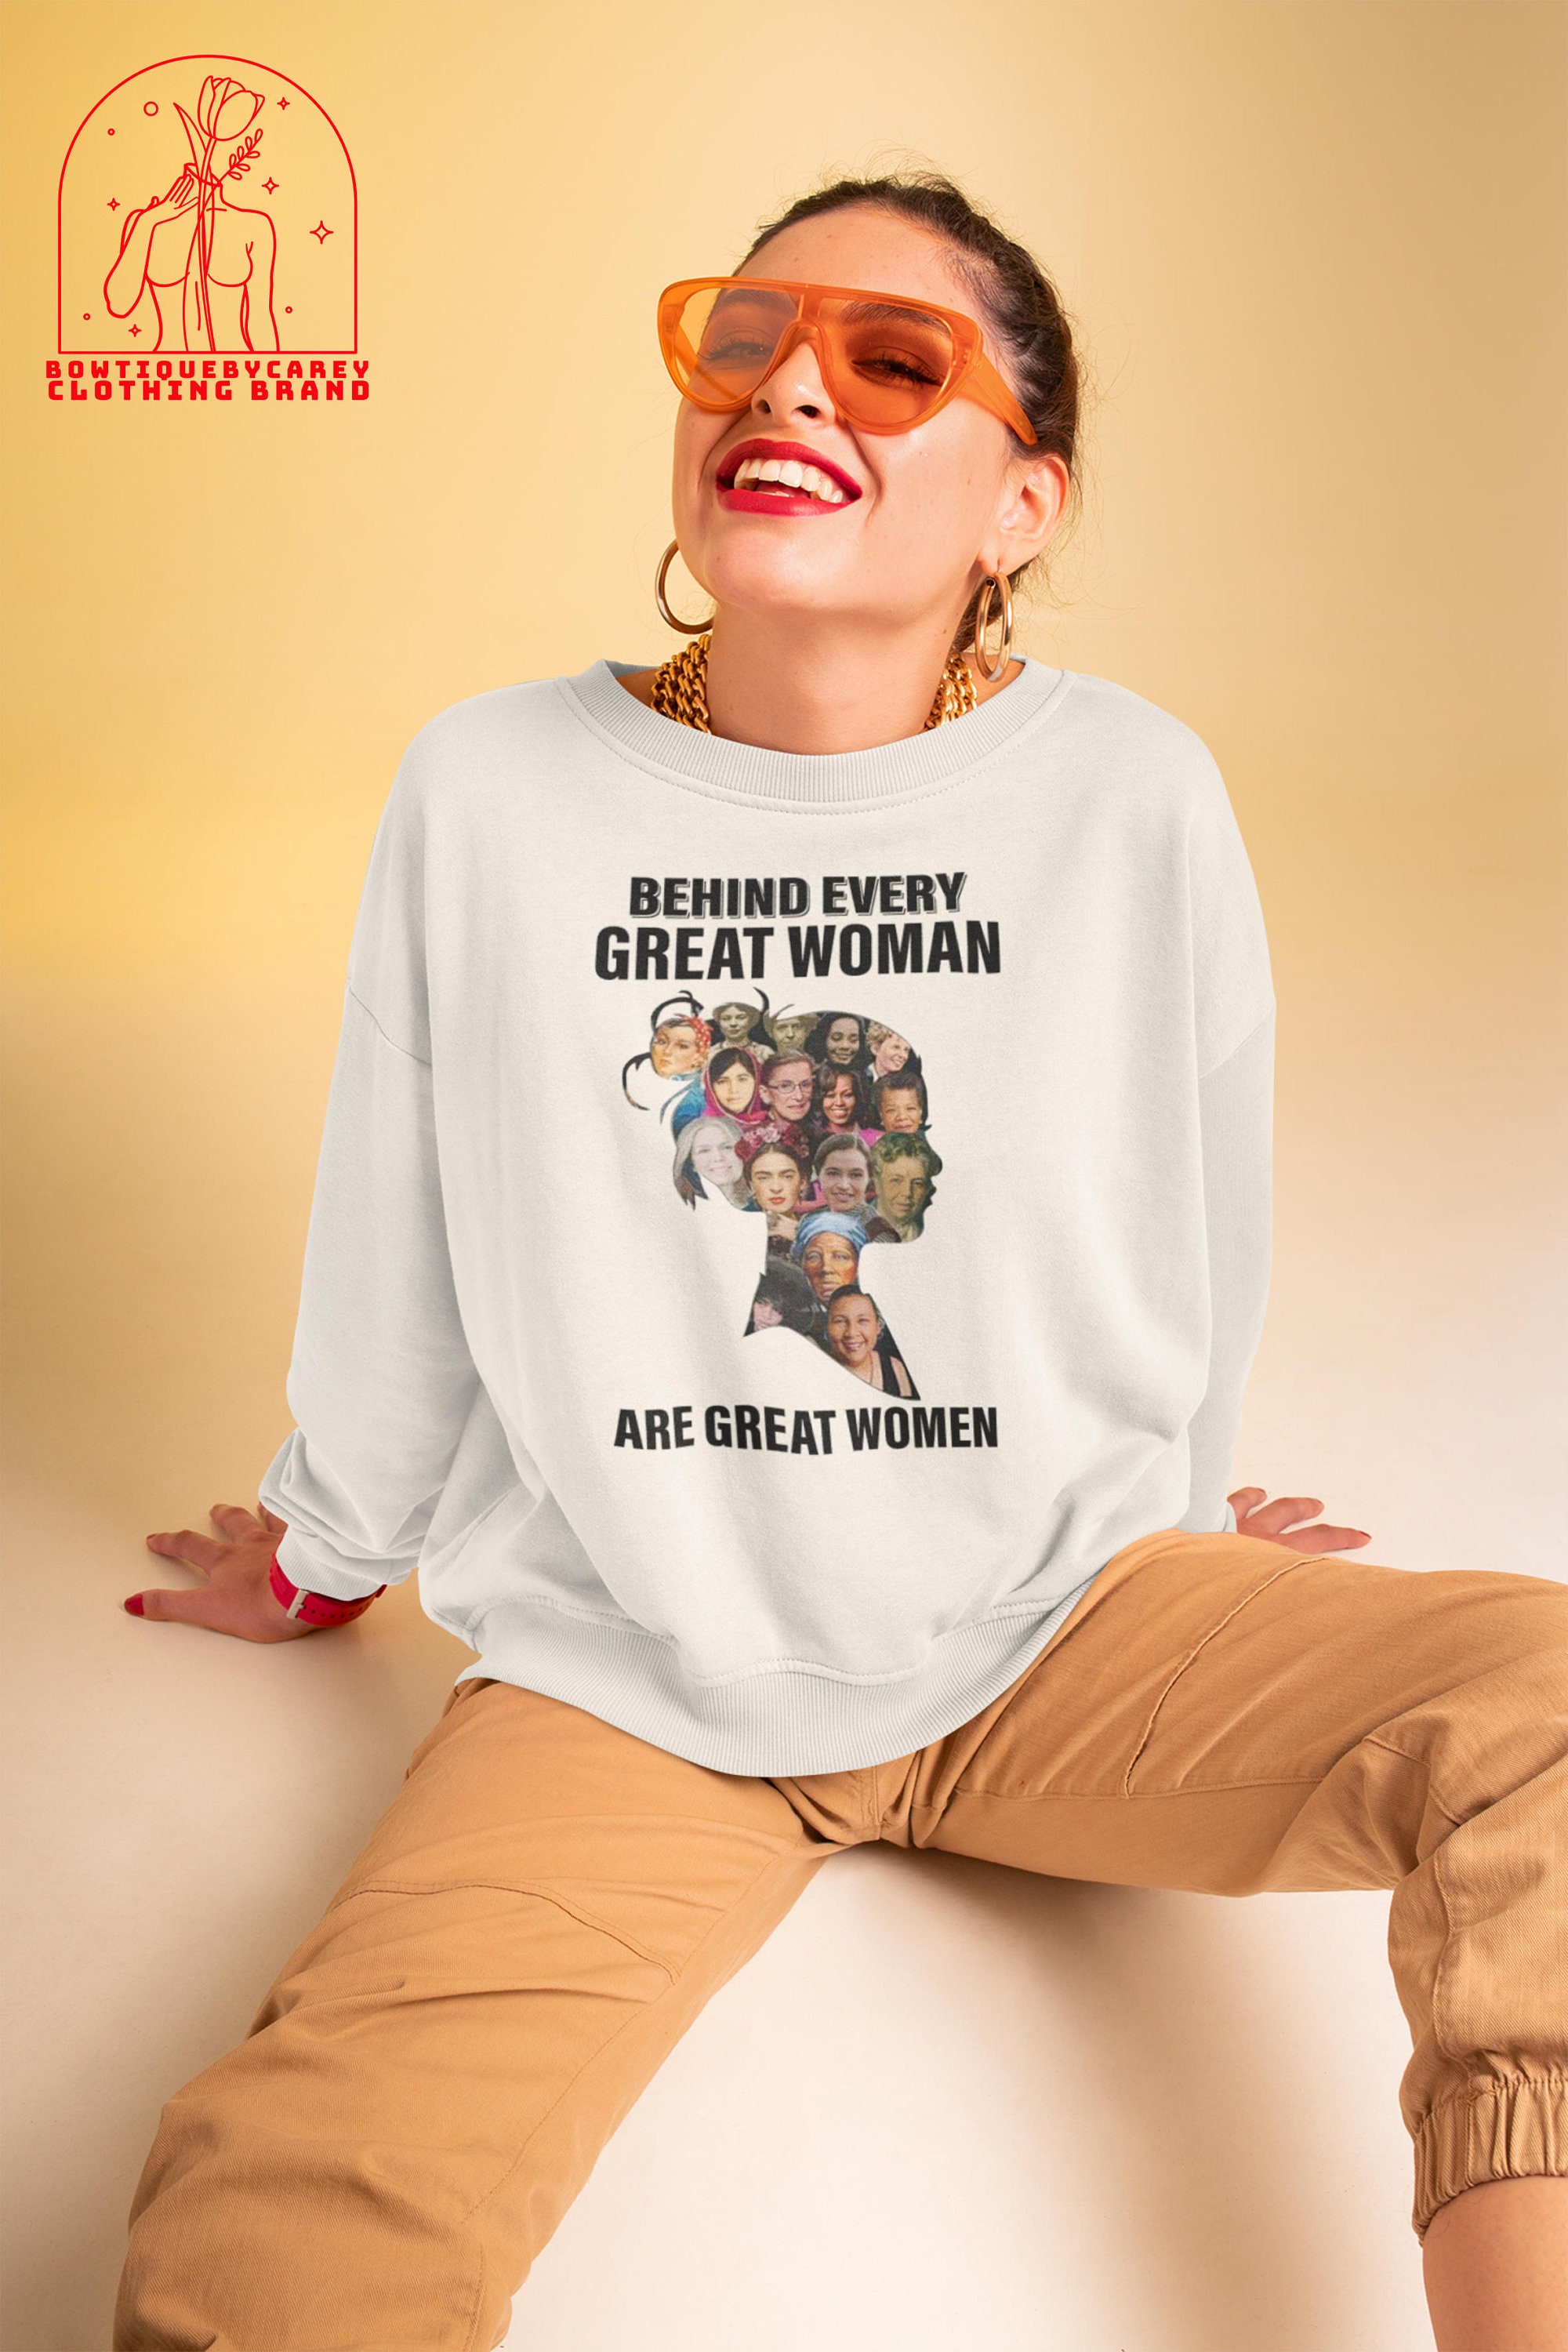 Behind Every Great Woman Are Great Women Feminists Woman Rights Rbg Ruth Bader Ginsburg Unisex T-Shirt